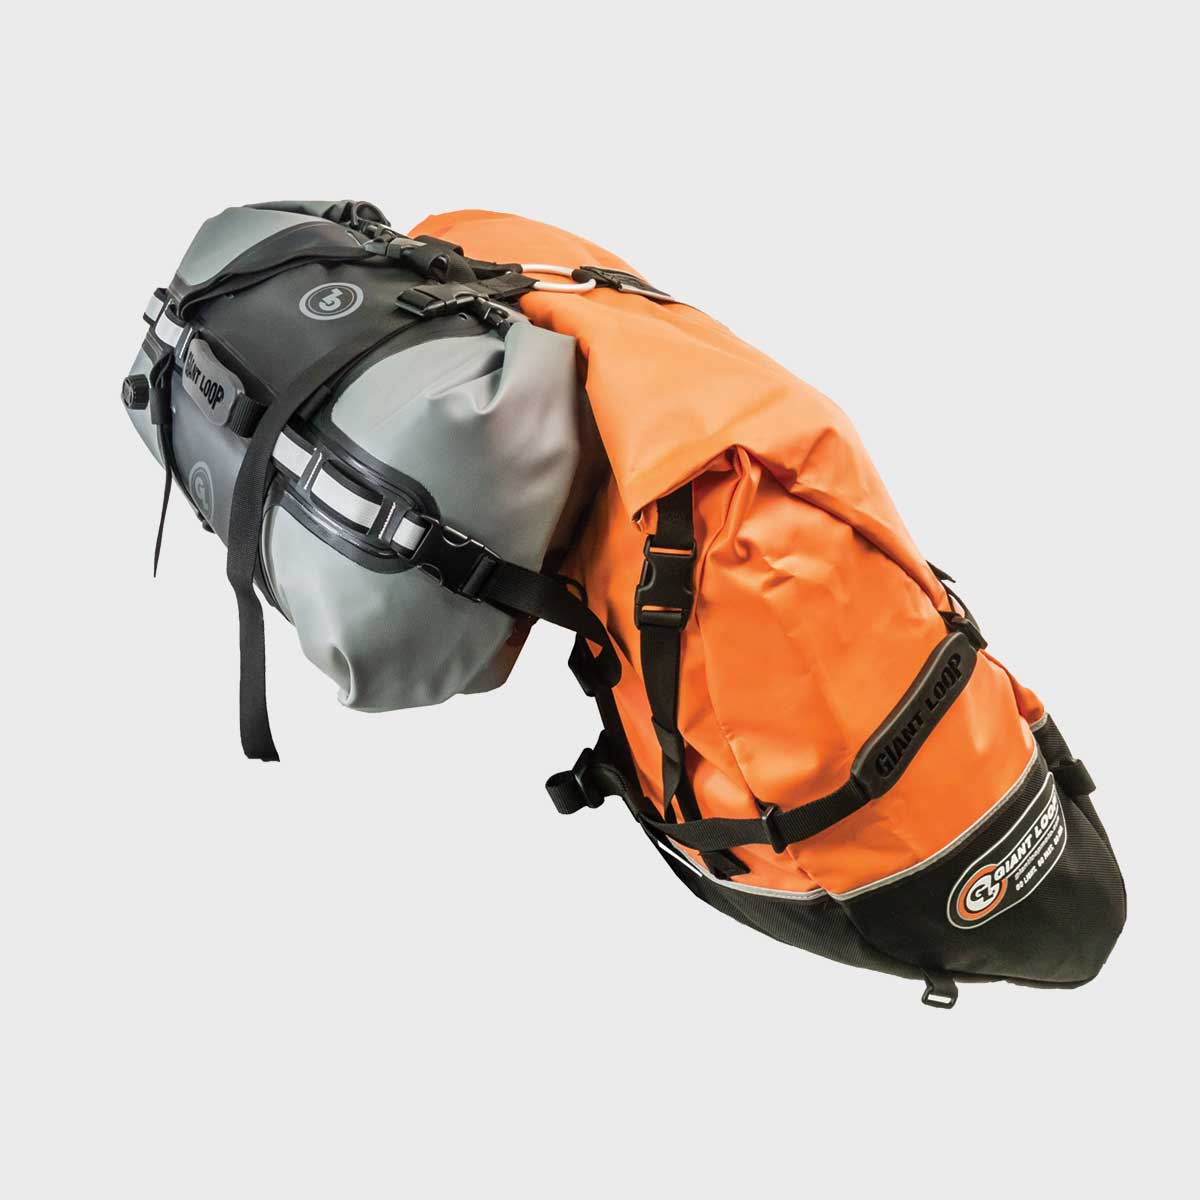 Camping Gear Bags Inches to Liters Conversion Chart